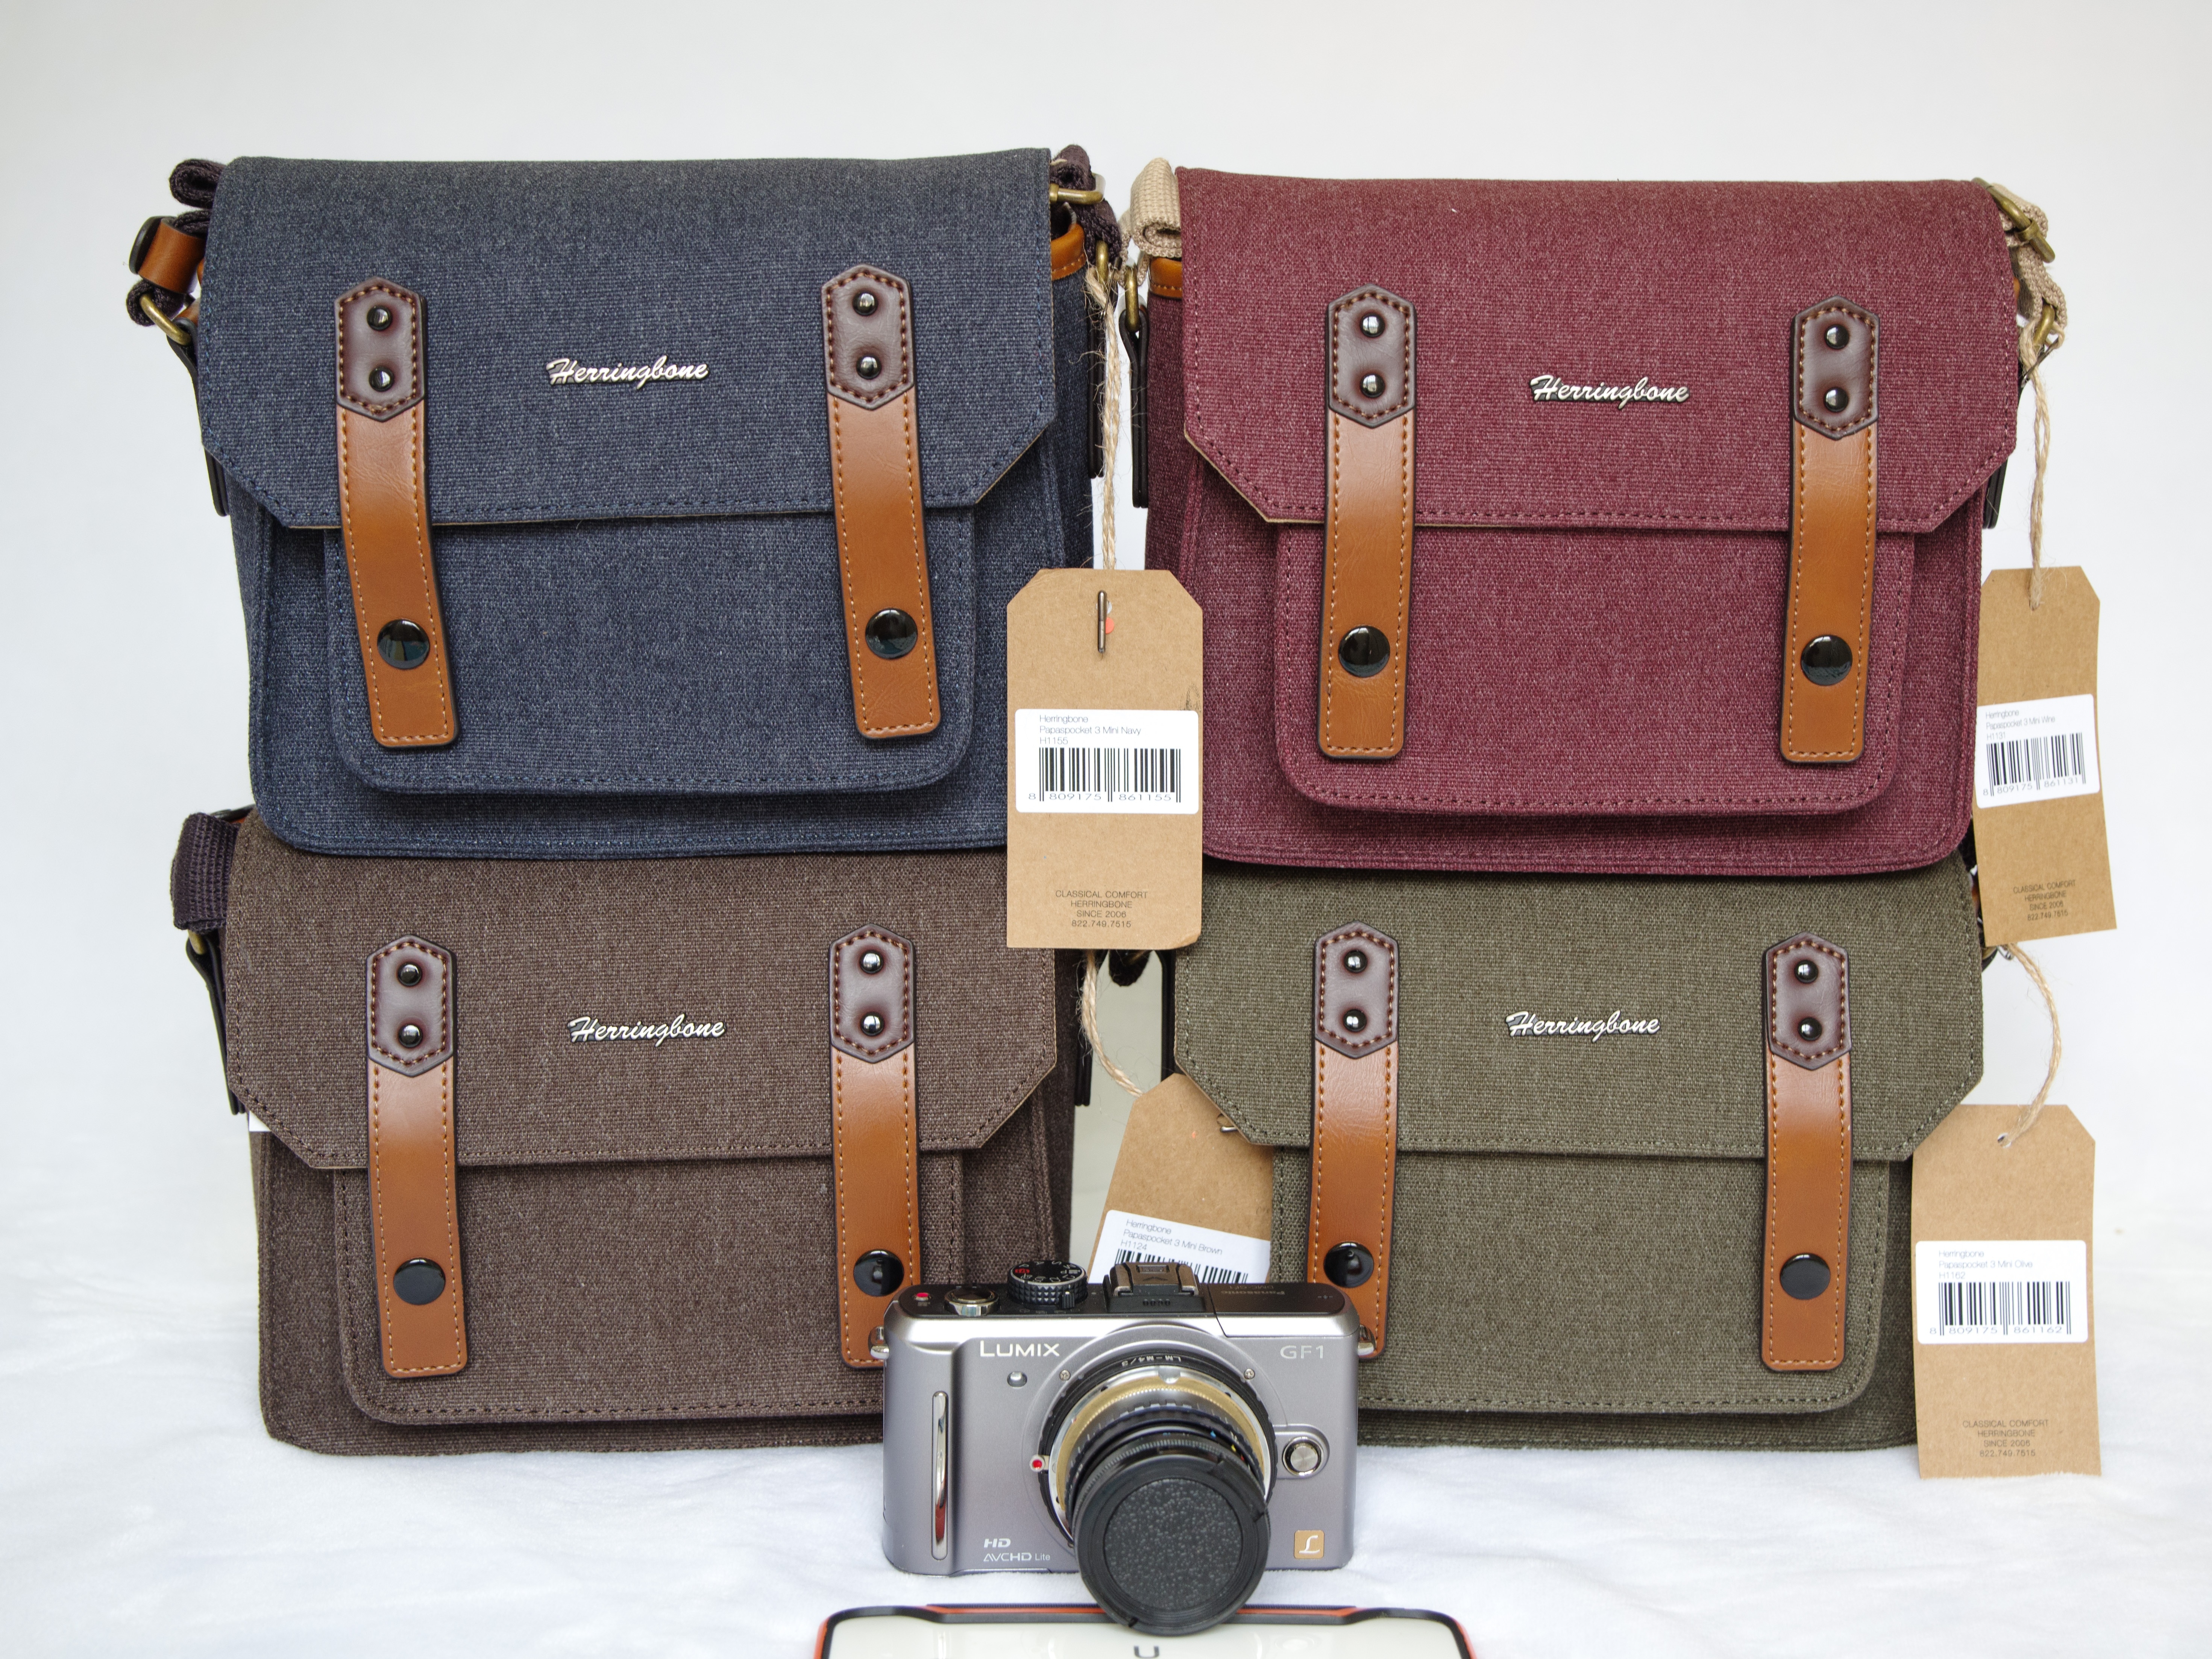 dslr camera and 4 sling bags